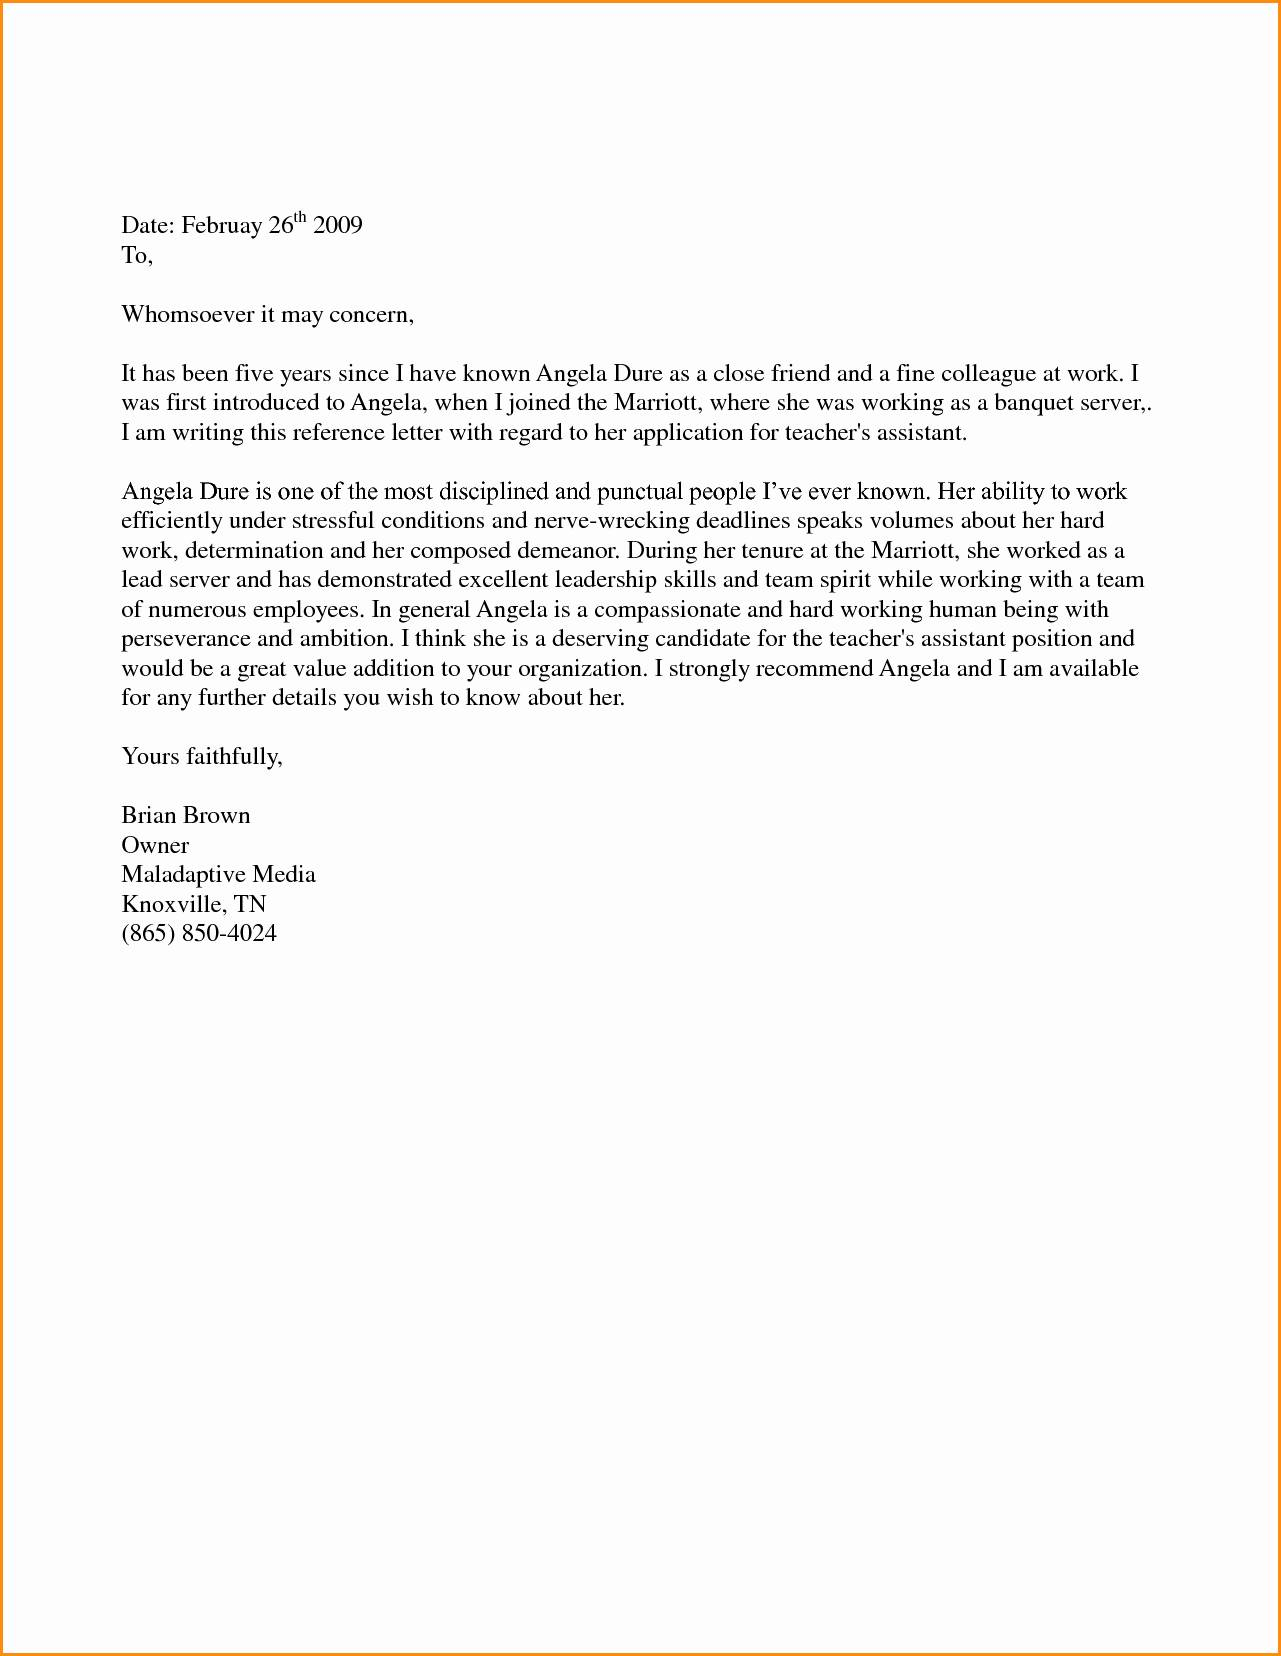 Letter Of Recommendation for A Friend Template - Letter Re Mendation for A Friend Template Inspirational format